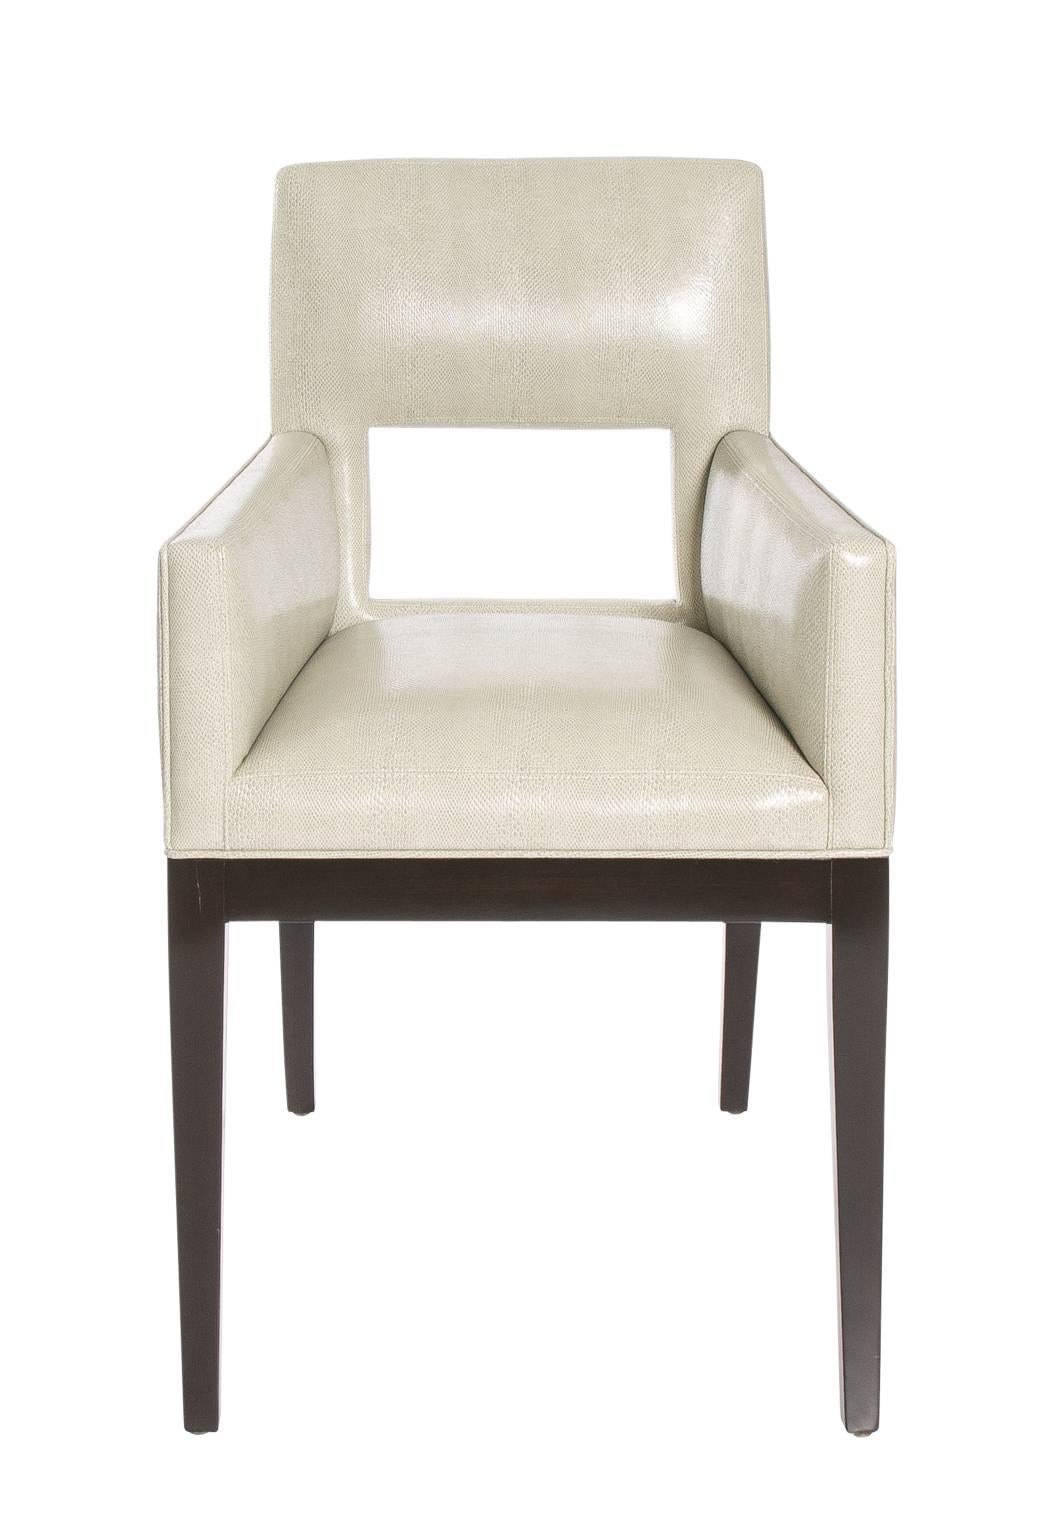 Contemporary Faux Lizard Upholstered Armchairs For Sale